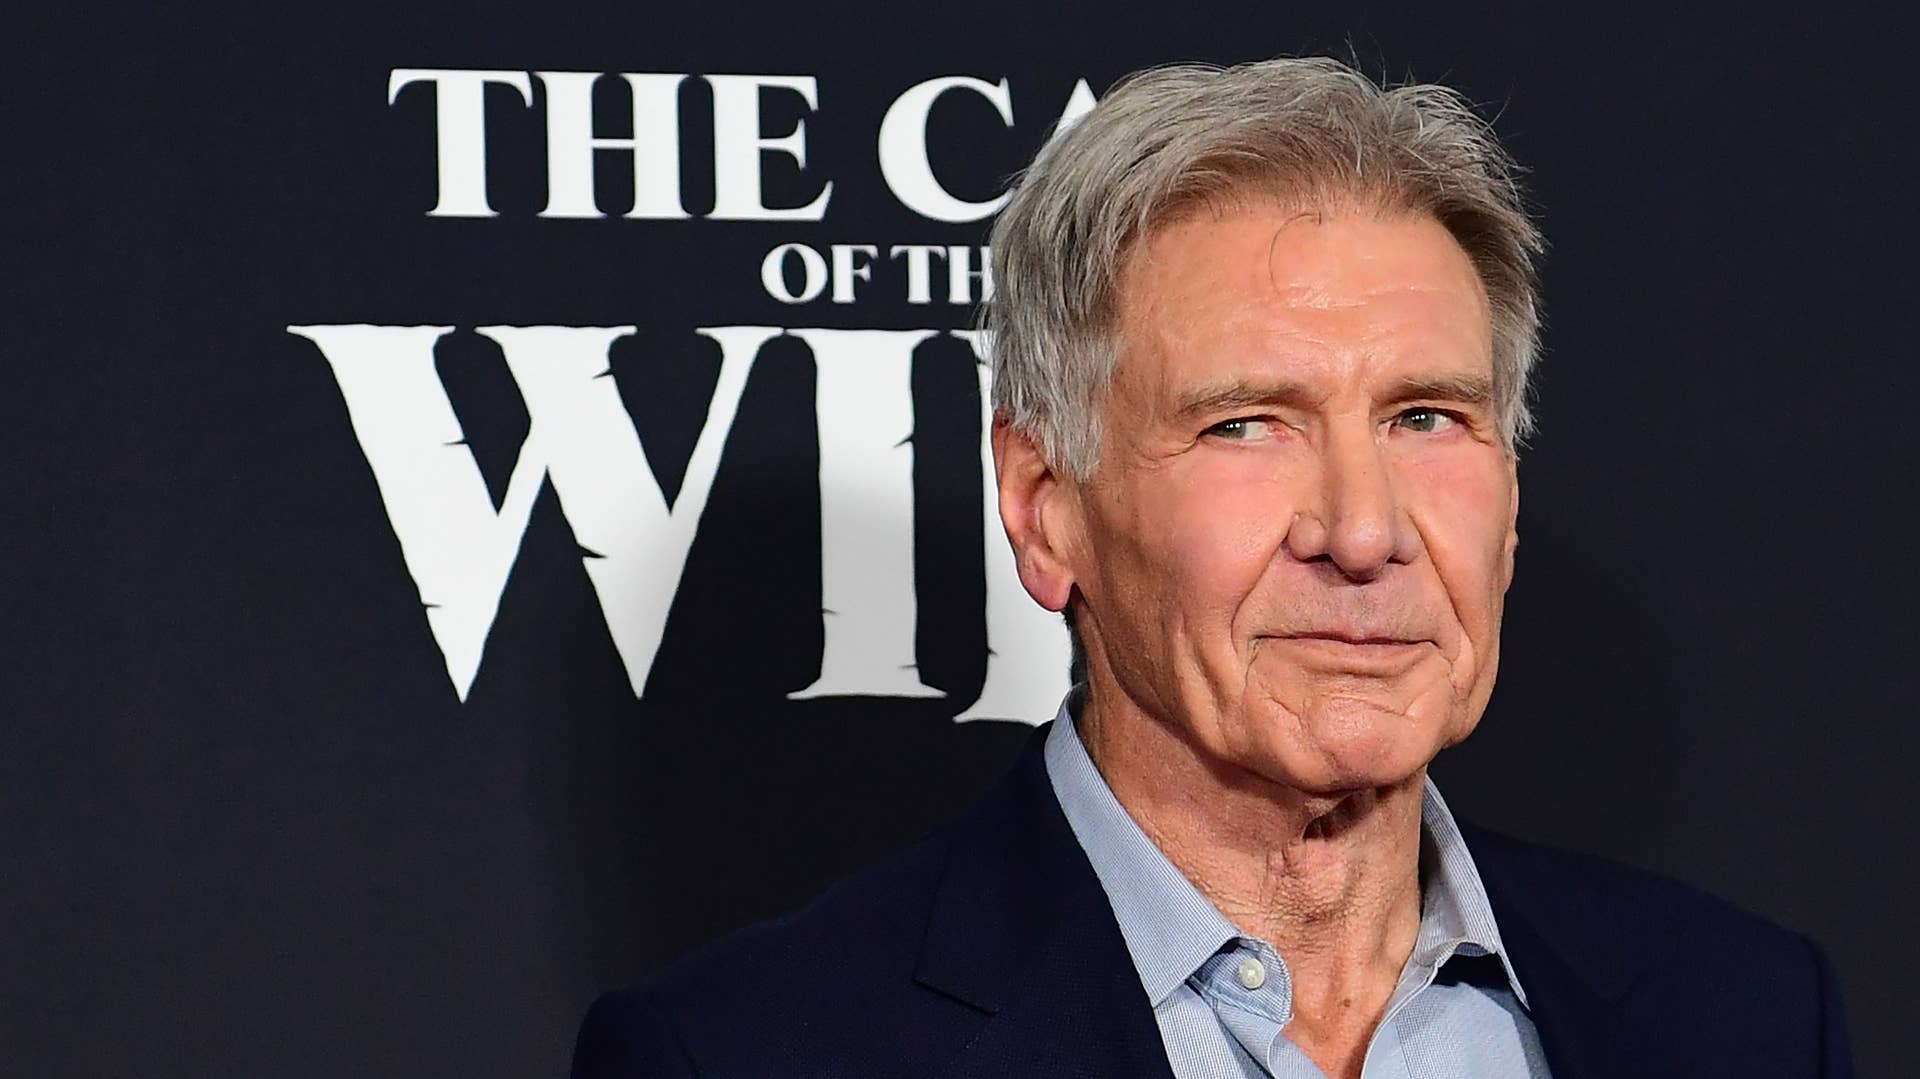 Harrison Ford arrives for Disney's "The Call of the Wild" premiere.